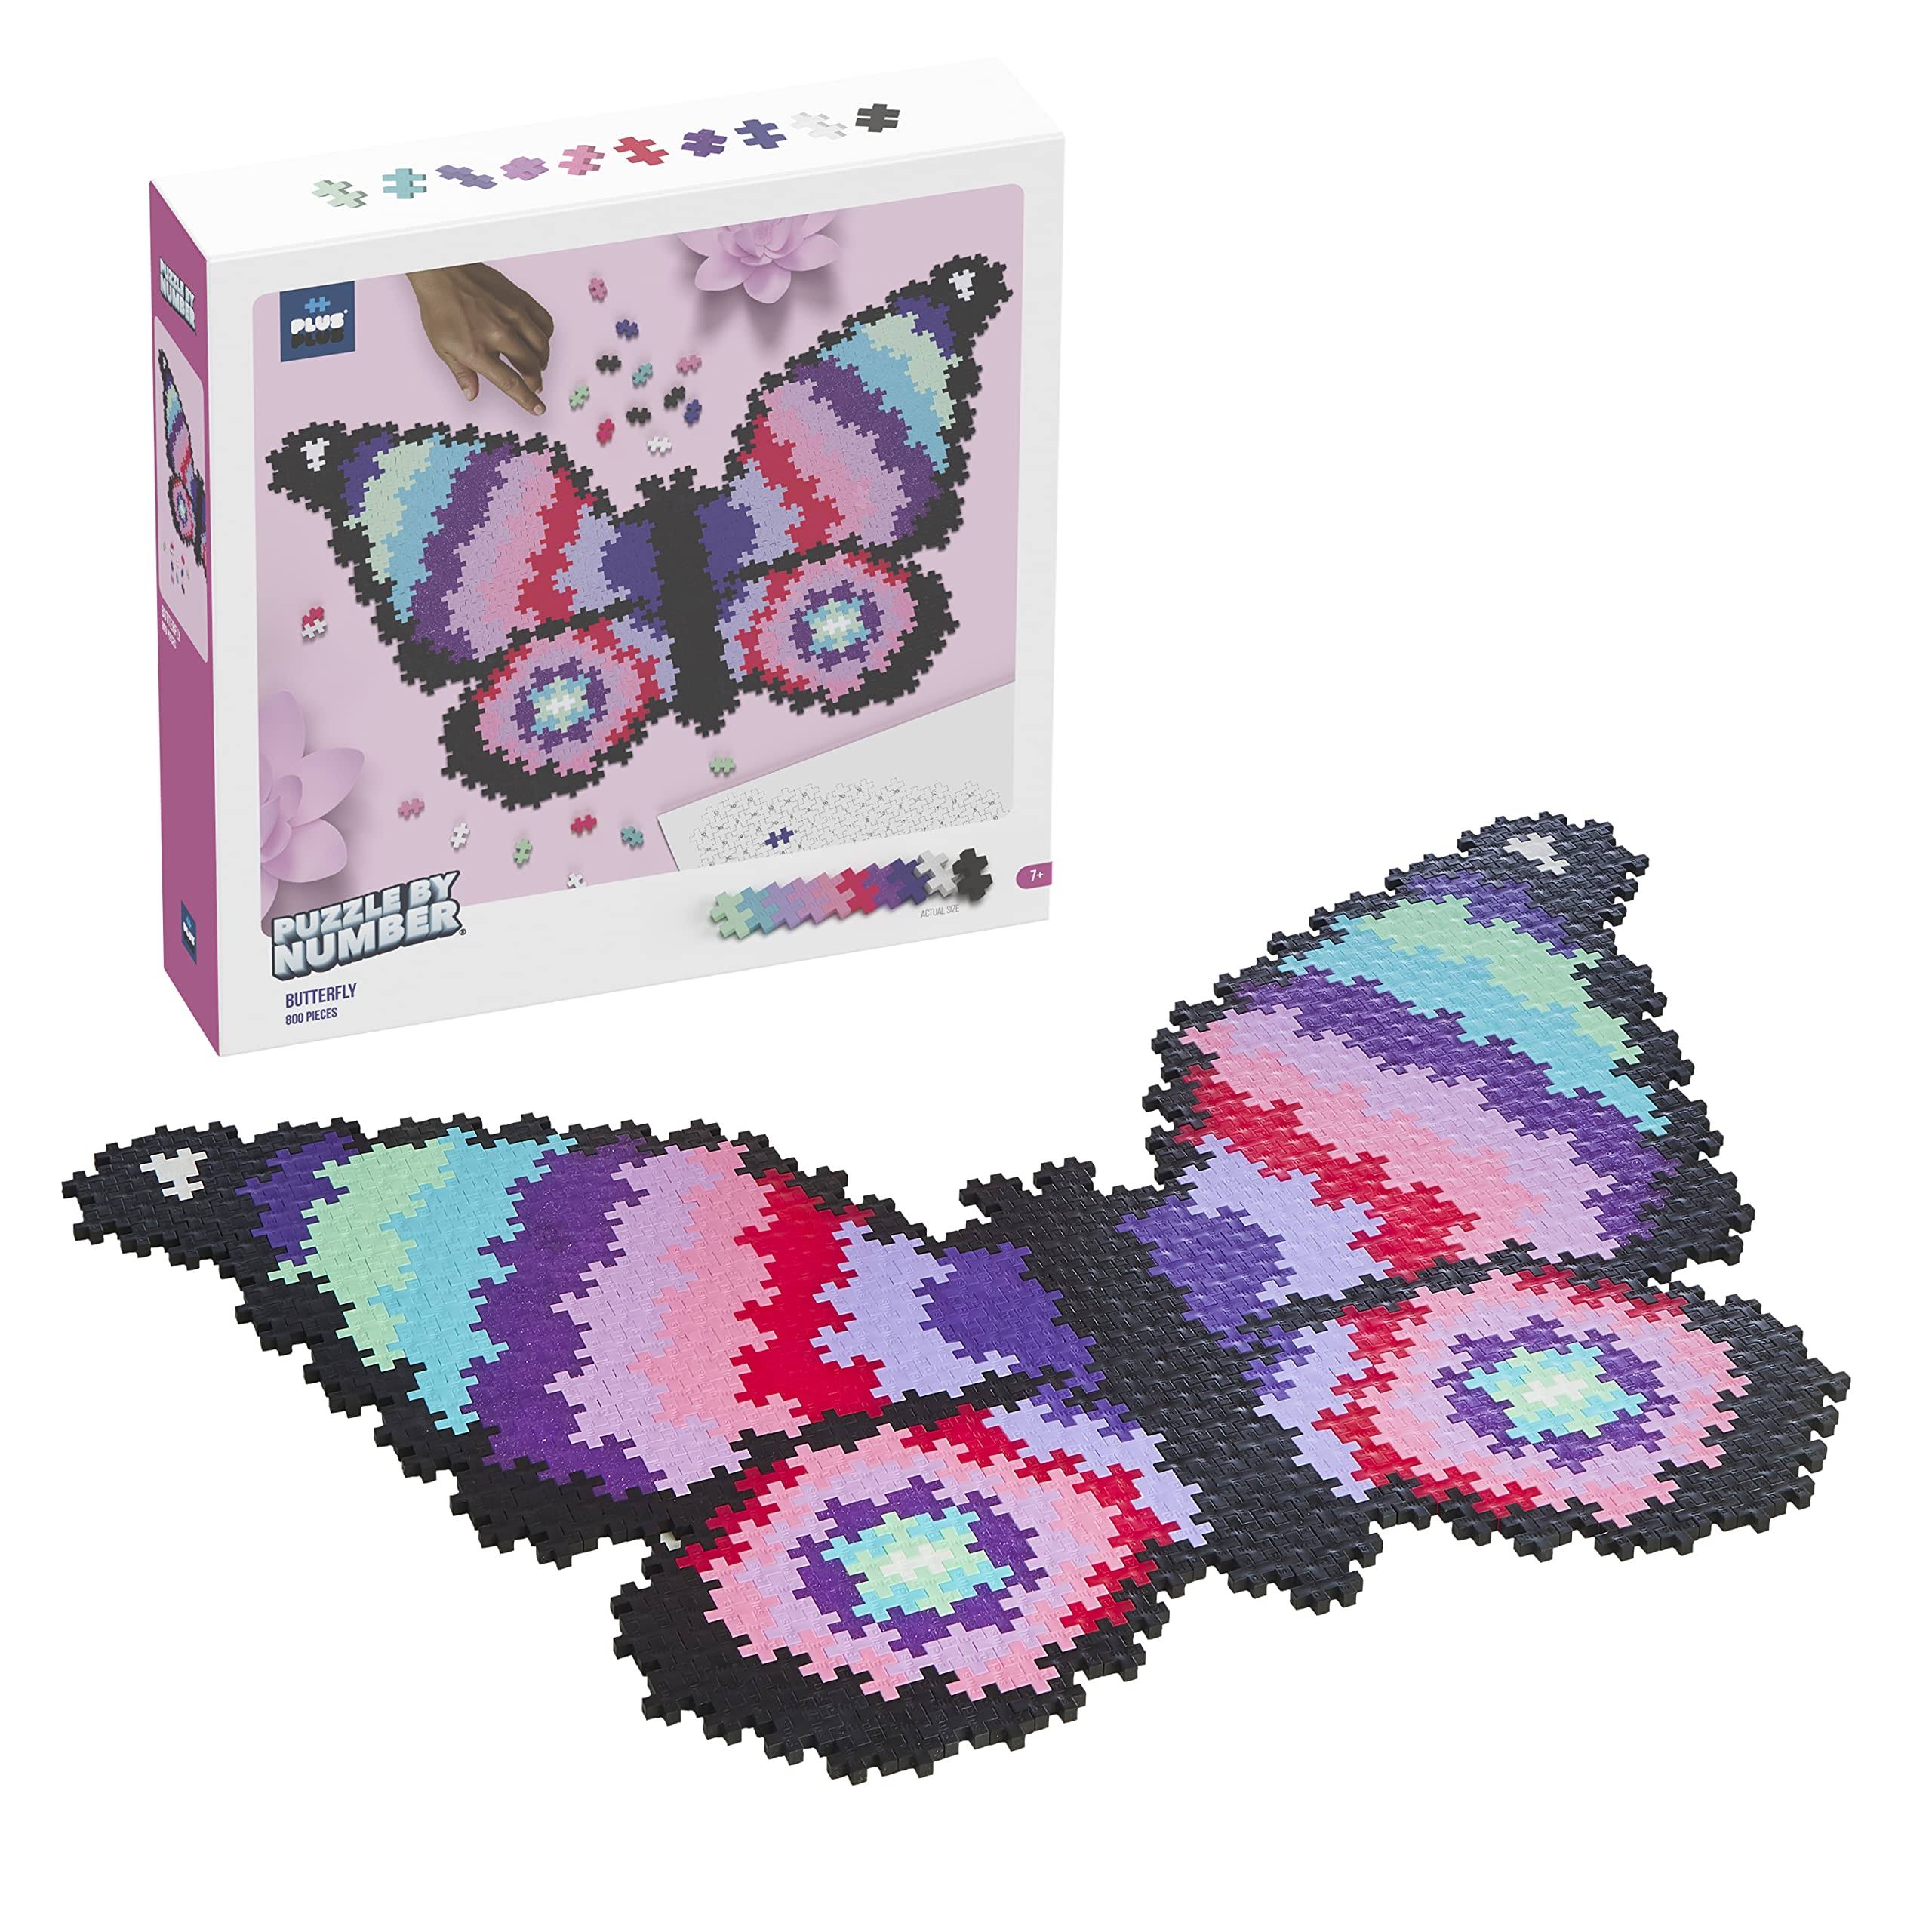 Plus-Plus Puzzle by Number - 800 PC Butterfly